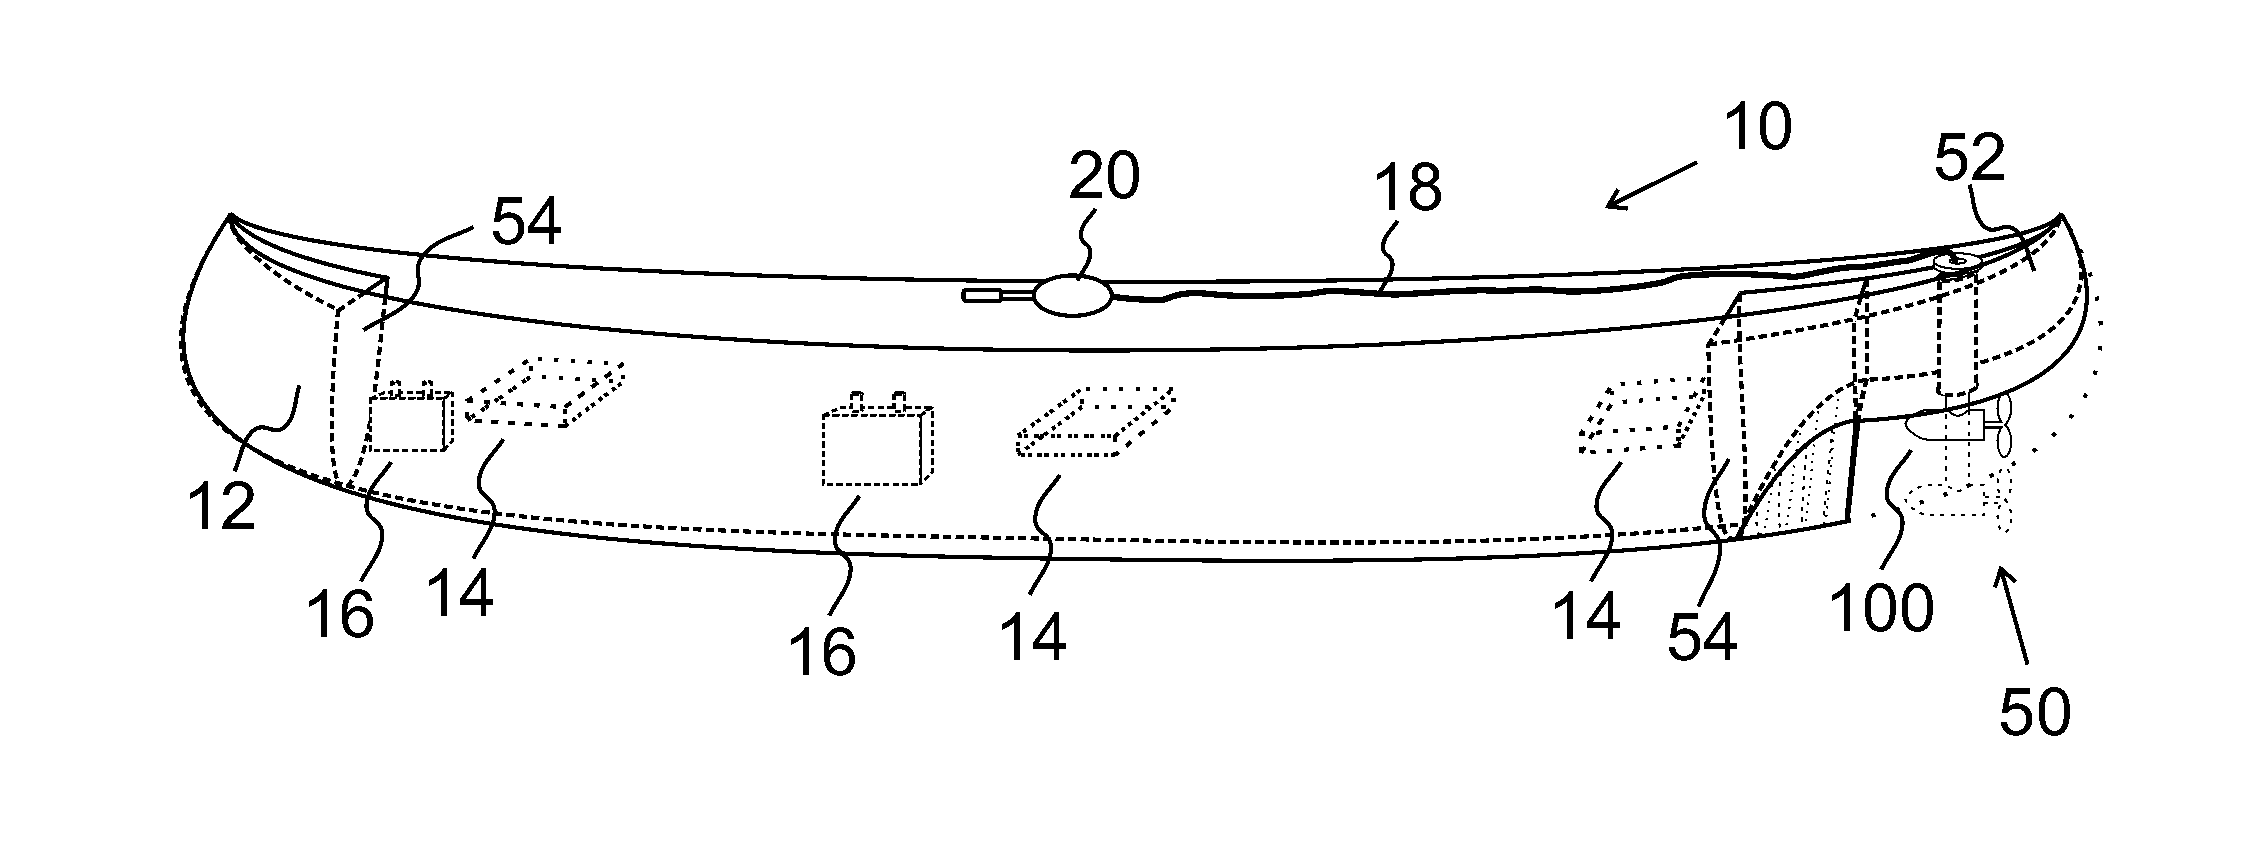 Shallow-draft watercraft propulsion and steering apparatus